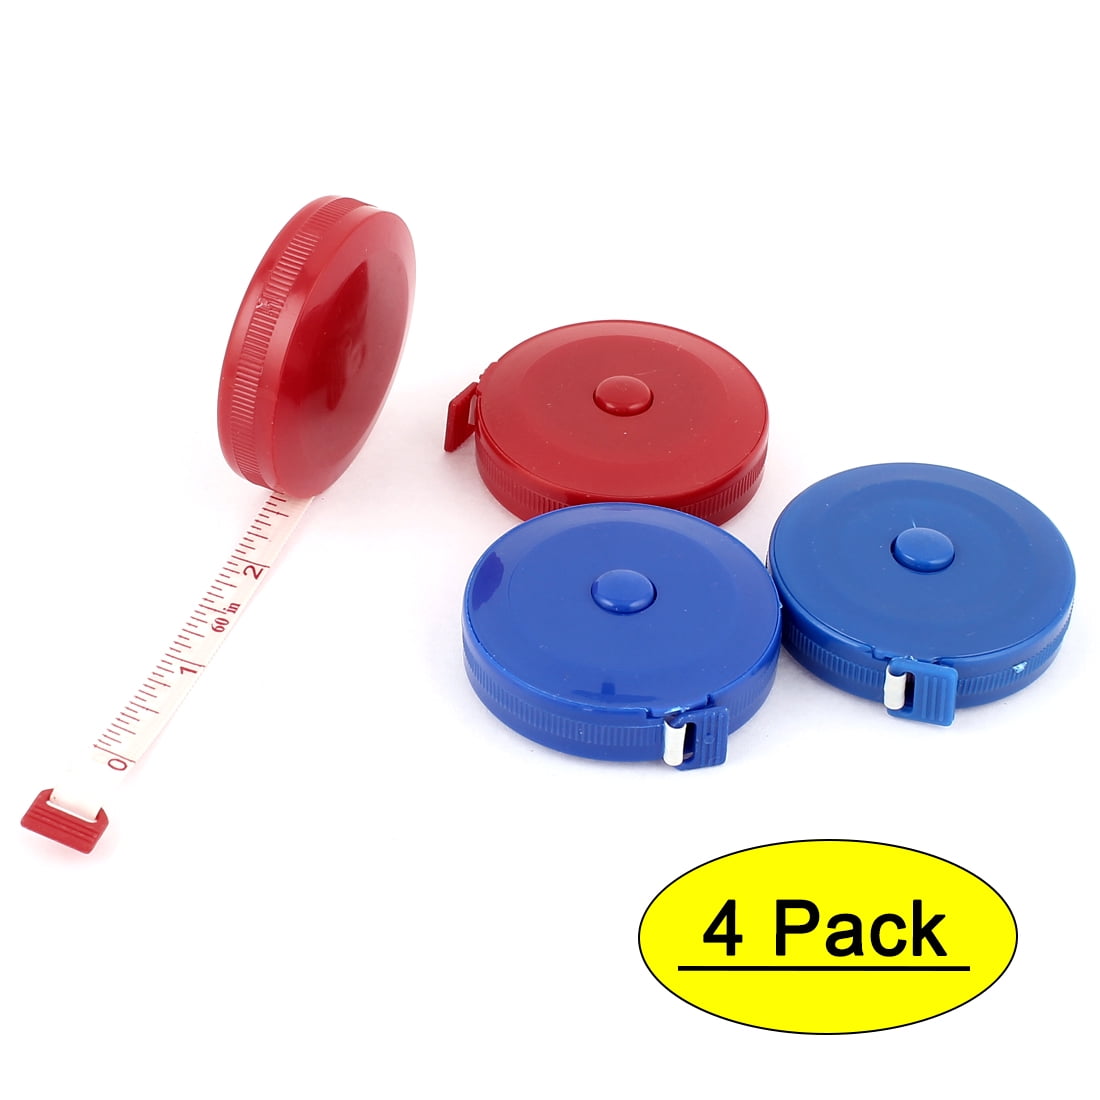 Milisten 2pcs Body Tape Measure Plastic 1.5 Meter Soft Tape Retractable 60-Inch Multifunciton Tape Measuring Tape for Sewing Home